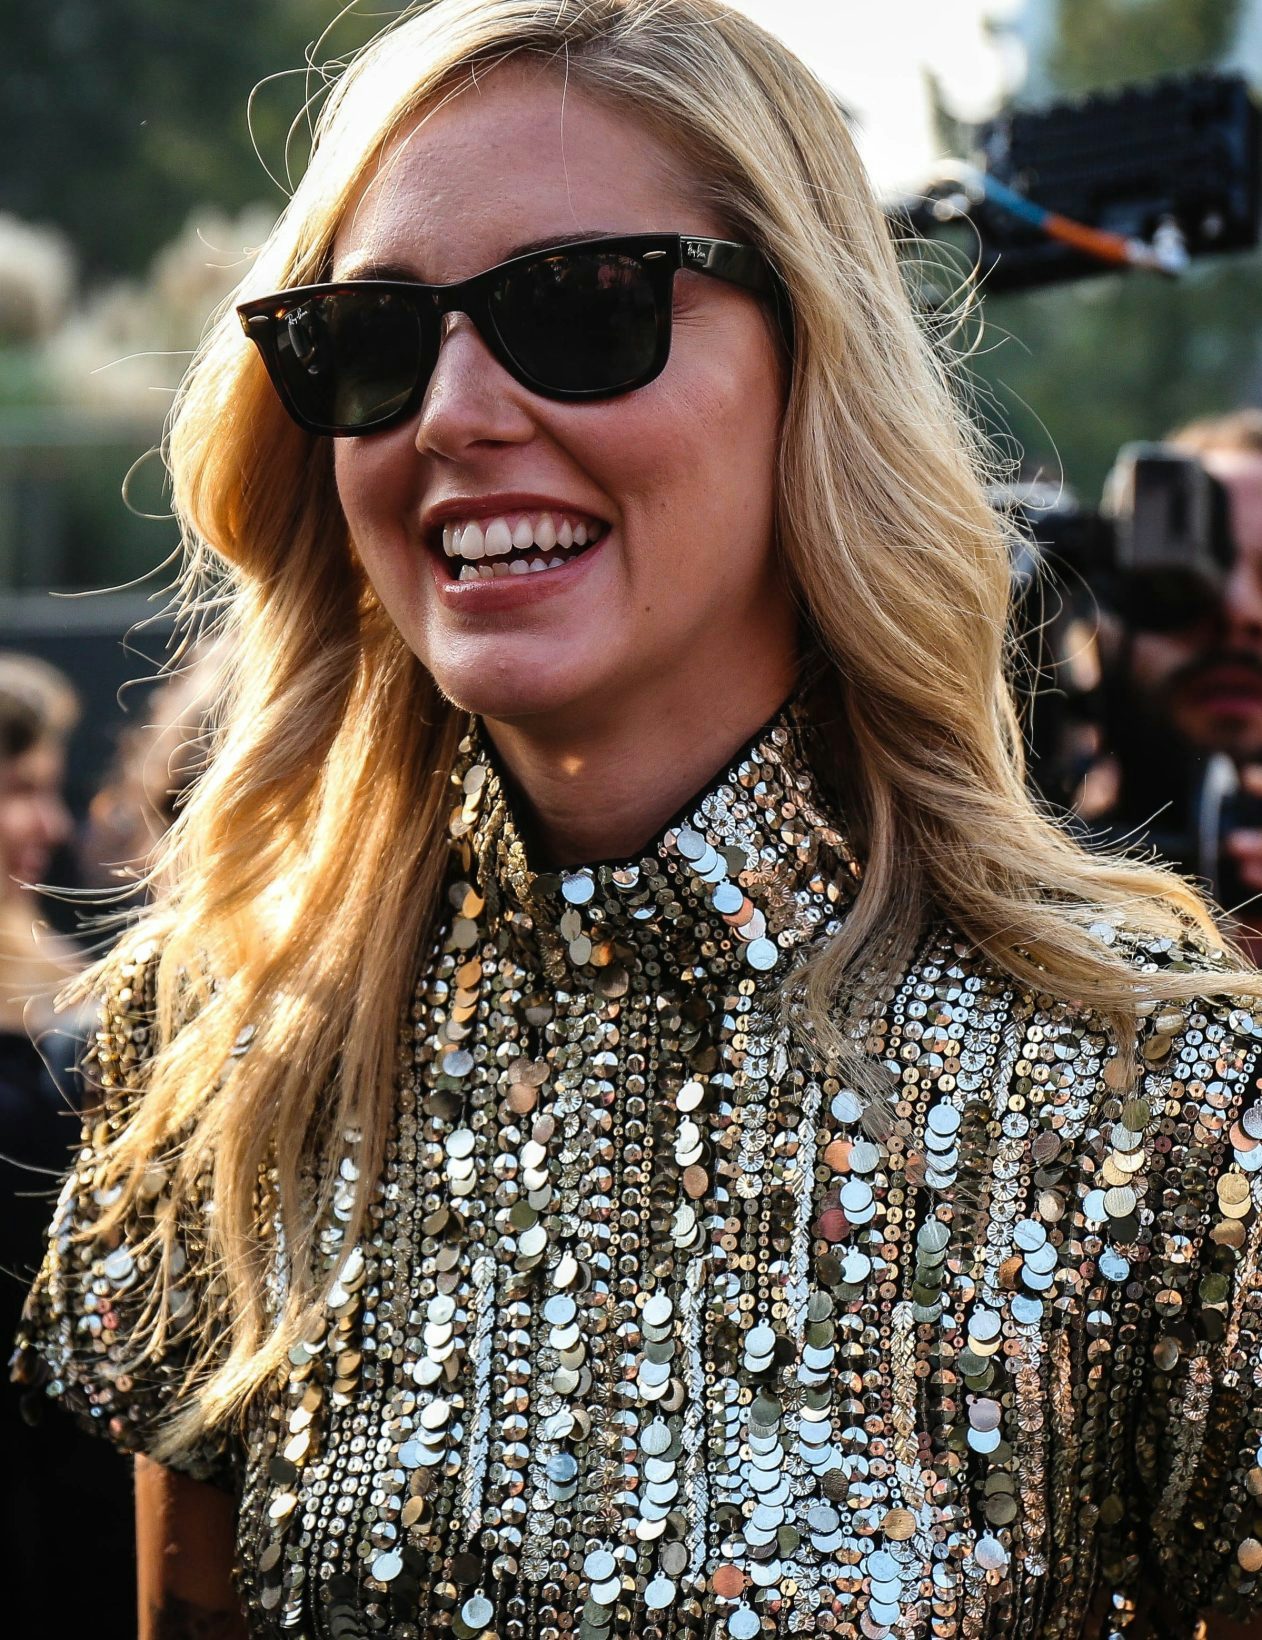 Chiara Ferragni signs a financial agreement with the antitrust authorities. A temporary respite